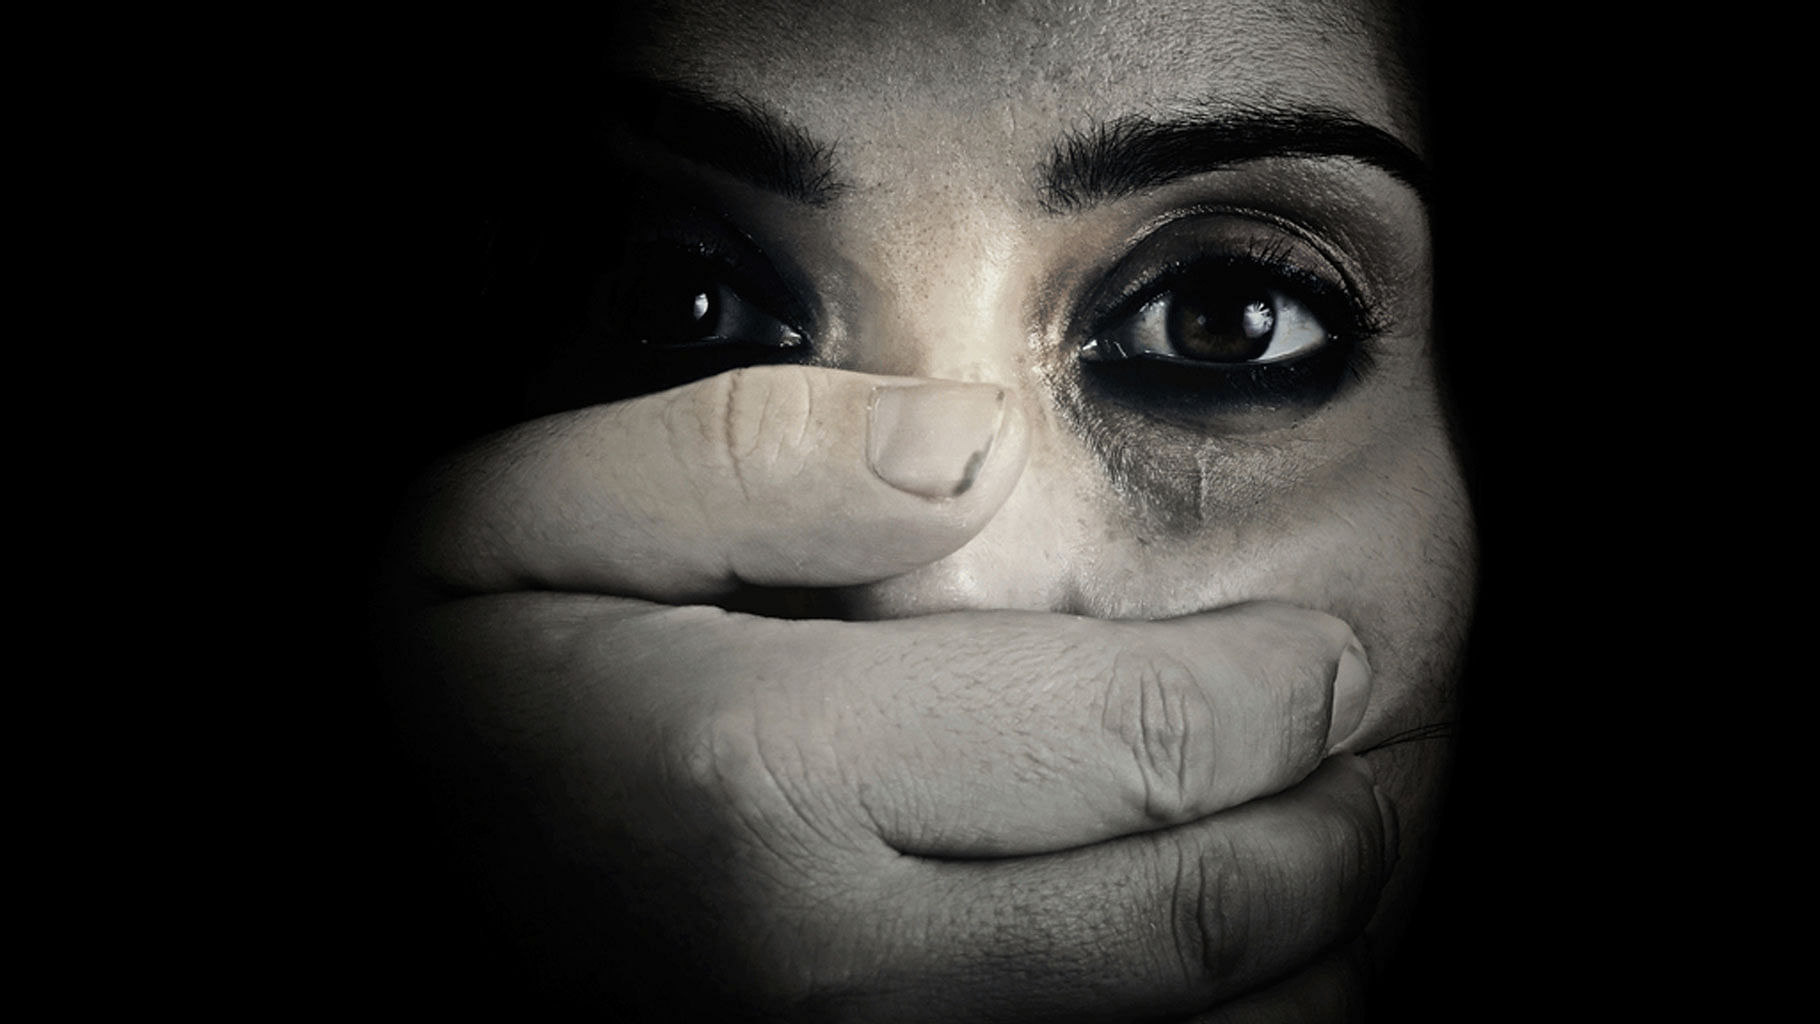 A Kerala session’s court has sentenced a Christian priest to forty years in prison for raping a minor. Photo used for representational purpose only. (Photo: iStockphoto)